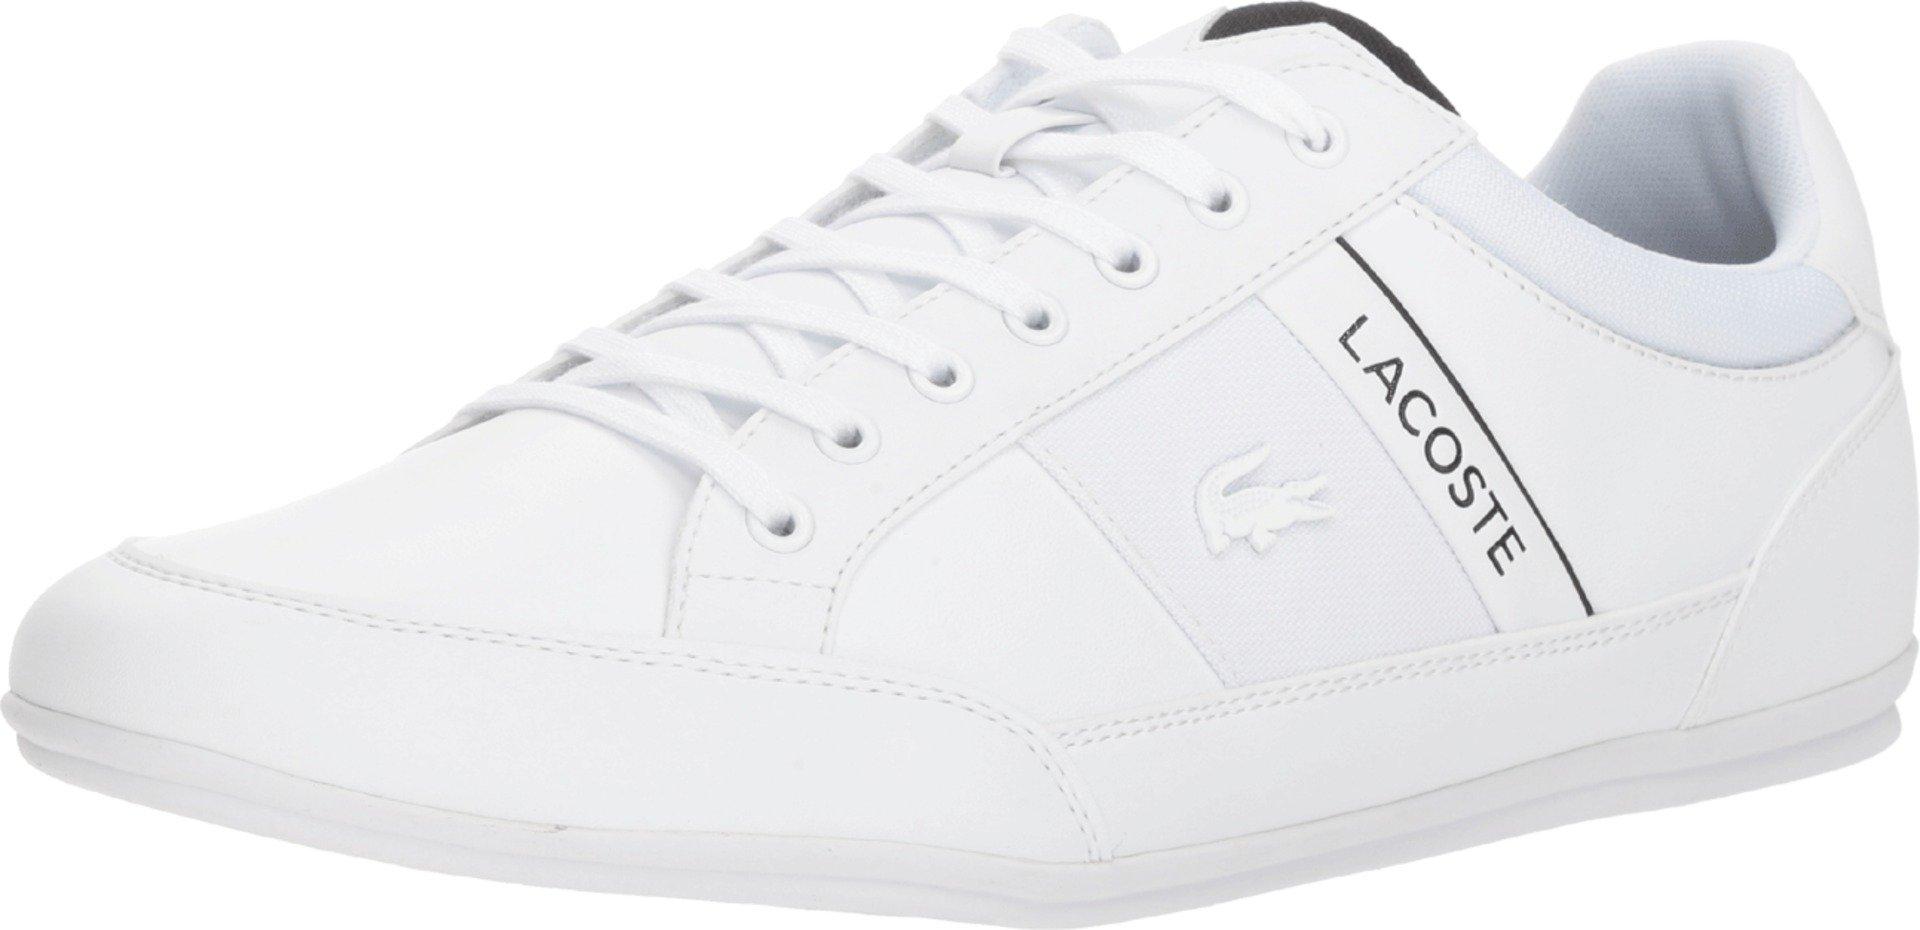 Lacoste Synthetic Chaymon 318 4 Us Shoes (trainers) in White for Men - Lyst